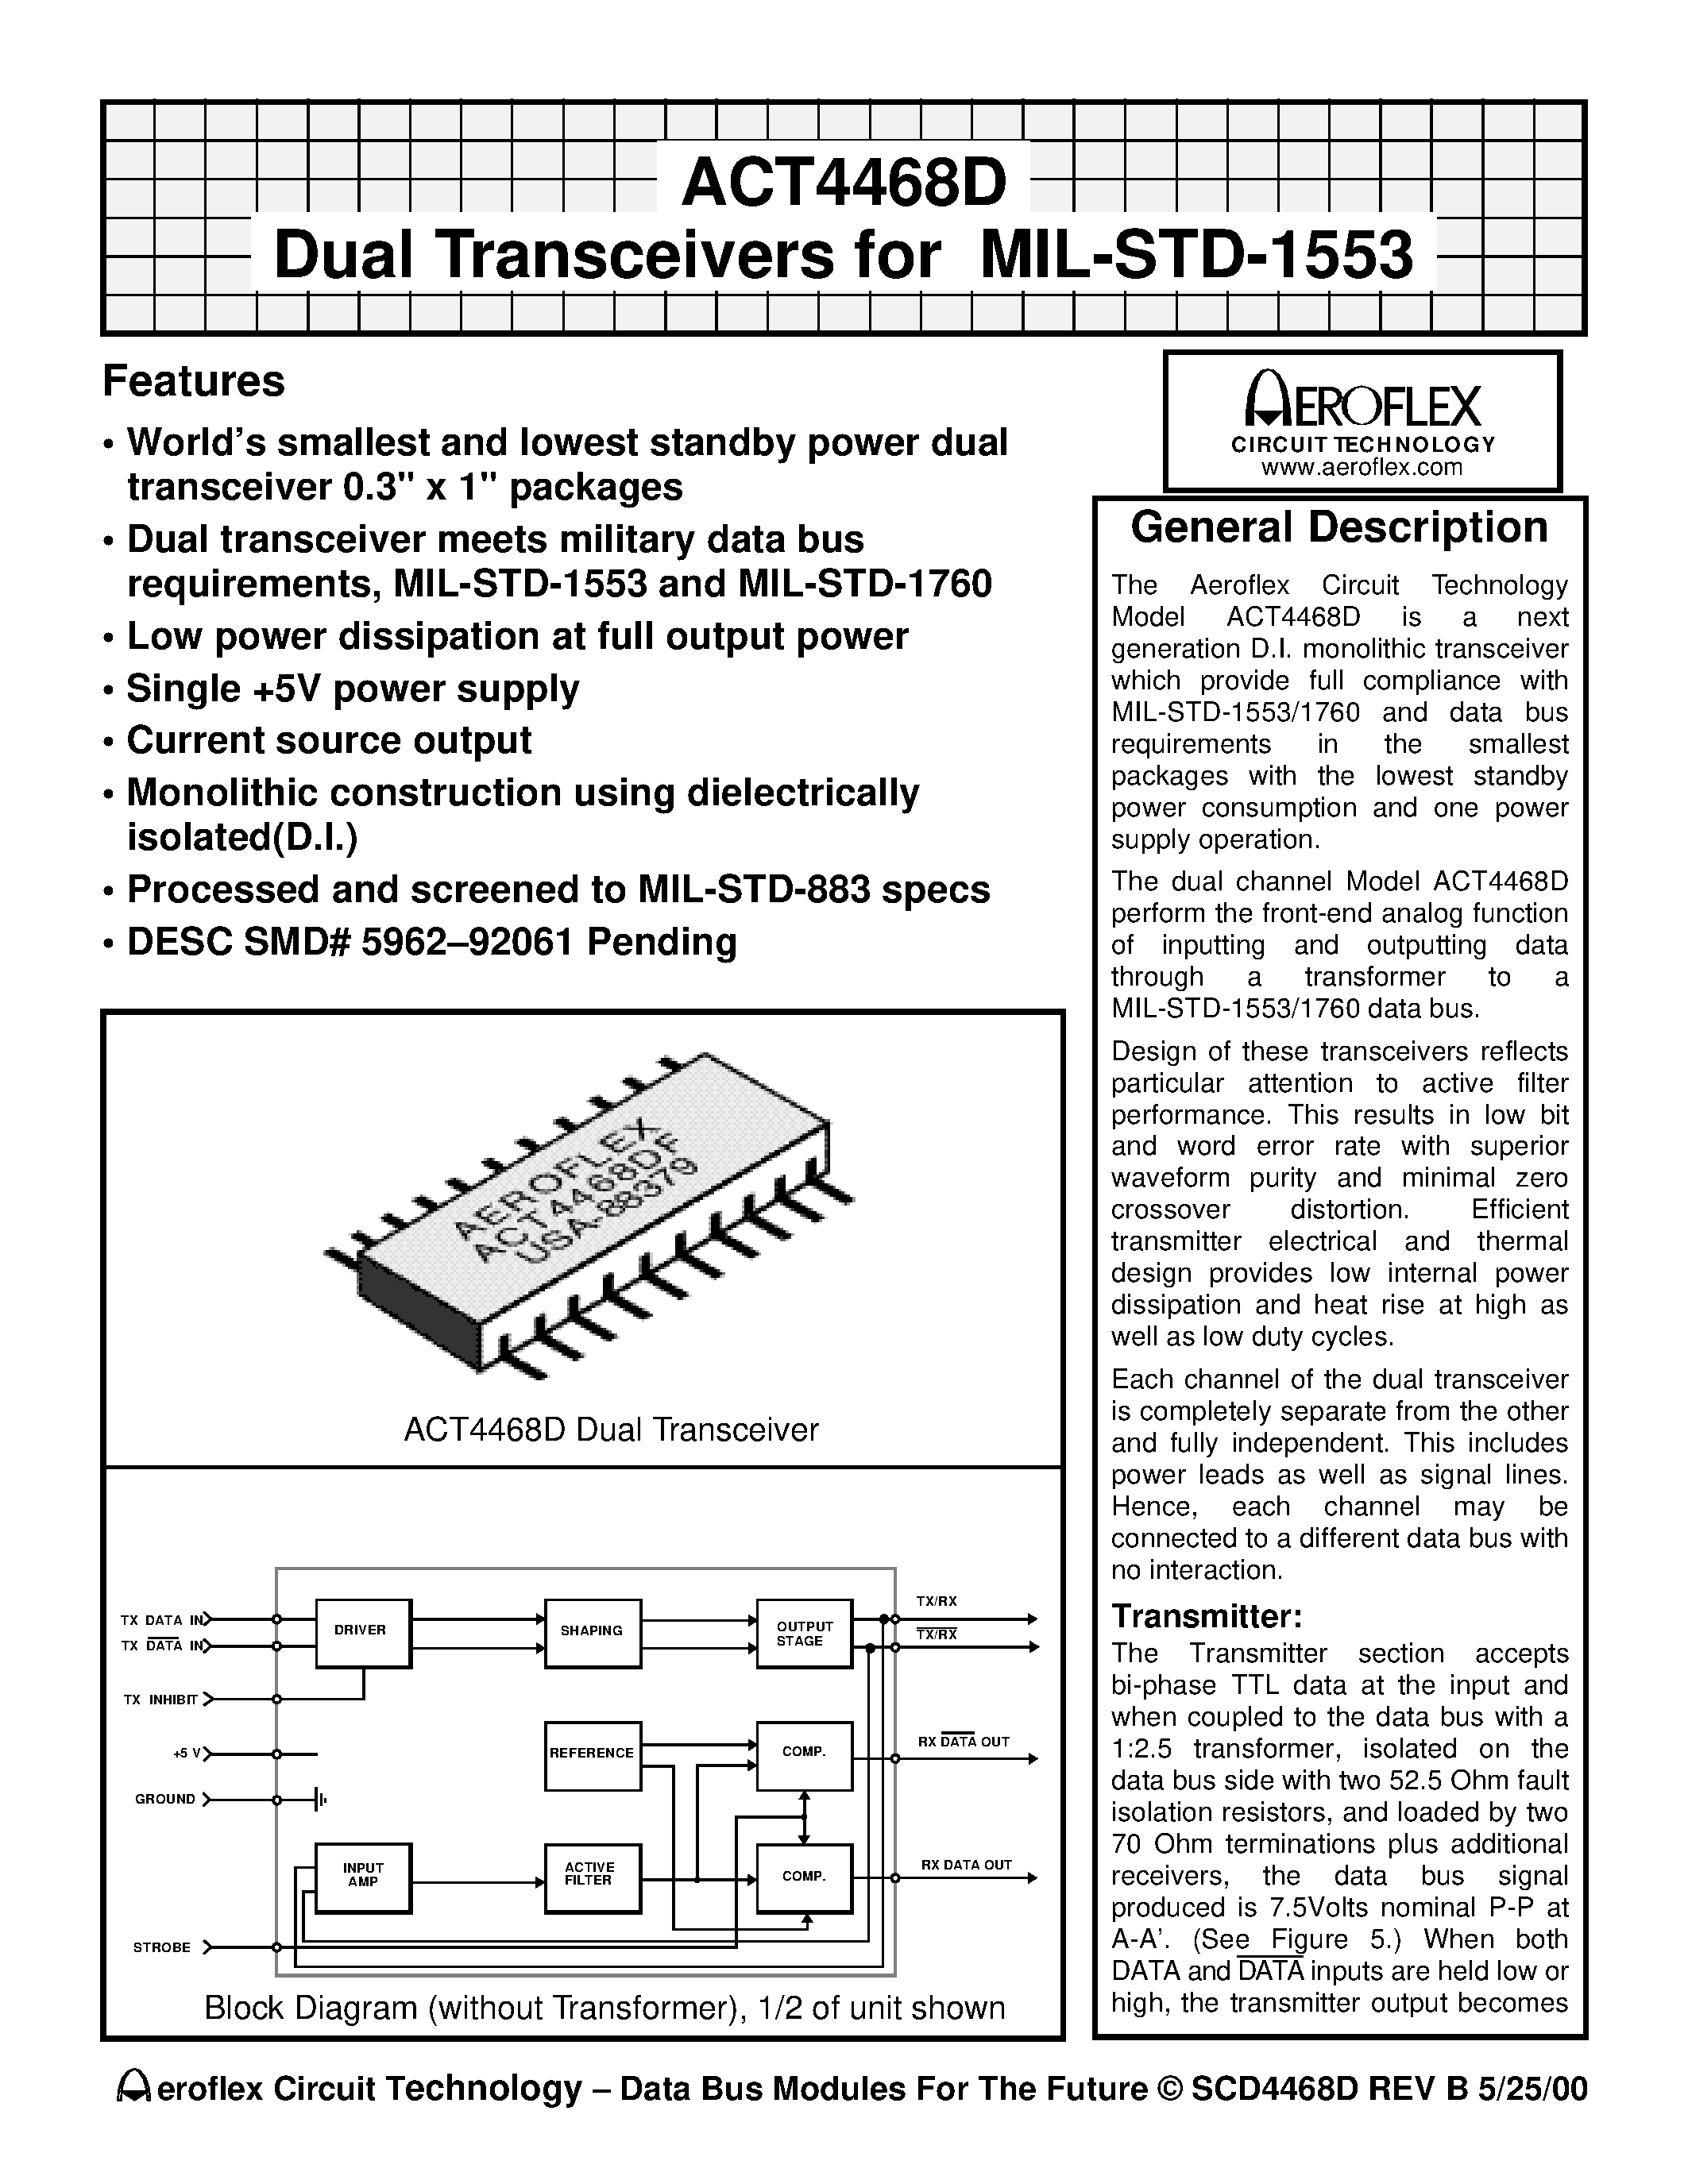 Даташит ACT4468DFI - ACT4468D Dual Transceivers for MIL-STD-1553 страница 1